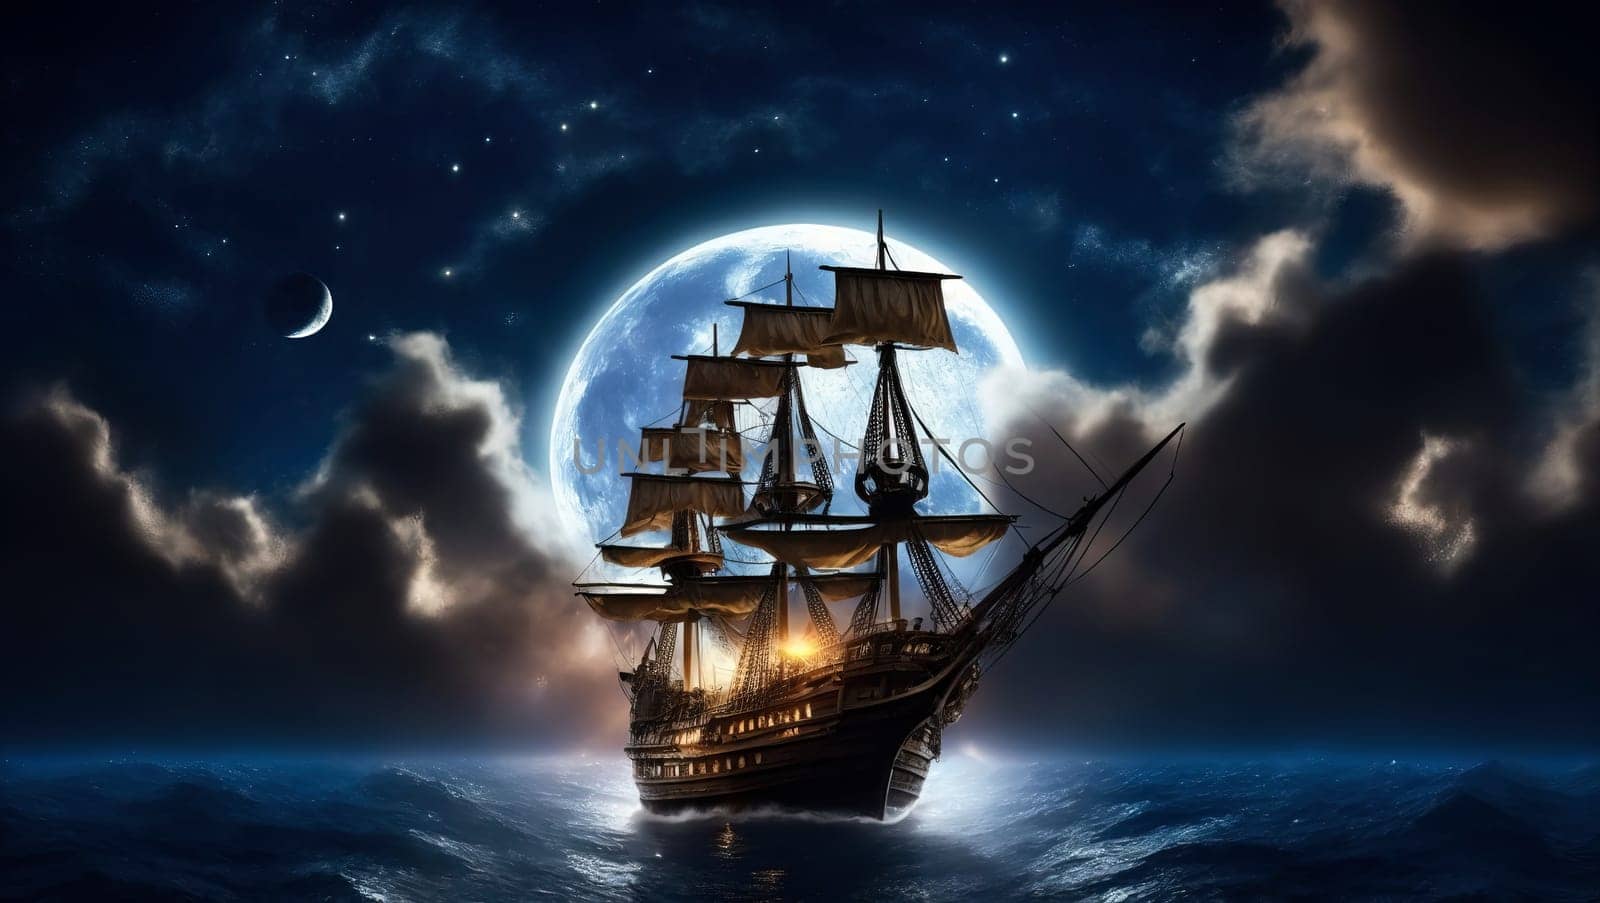 Sailing ship in the moonlight by applesstock